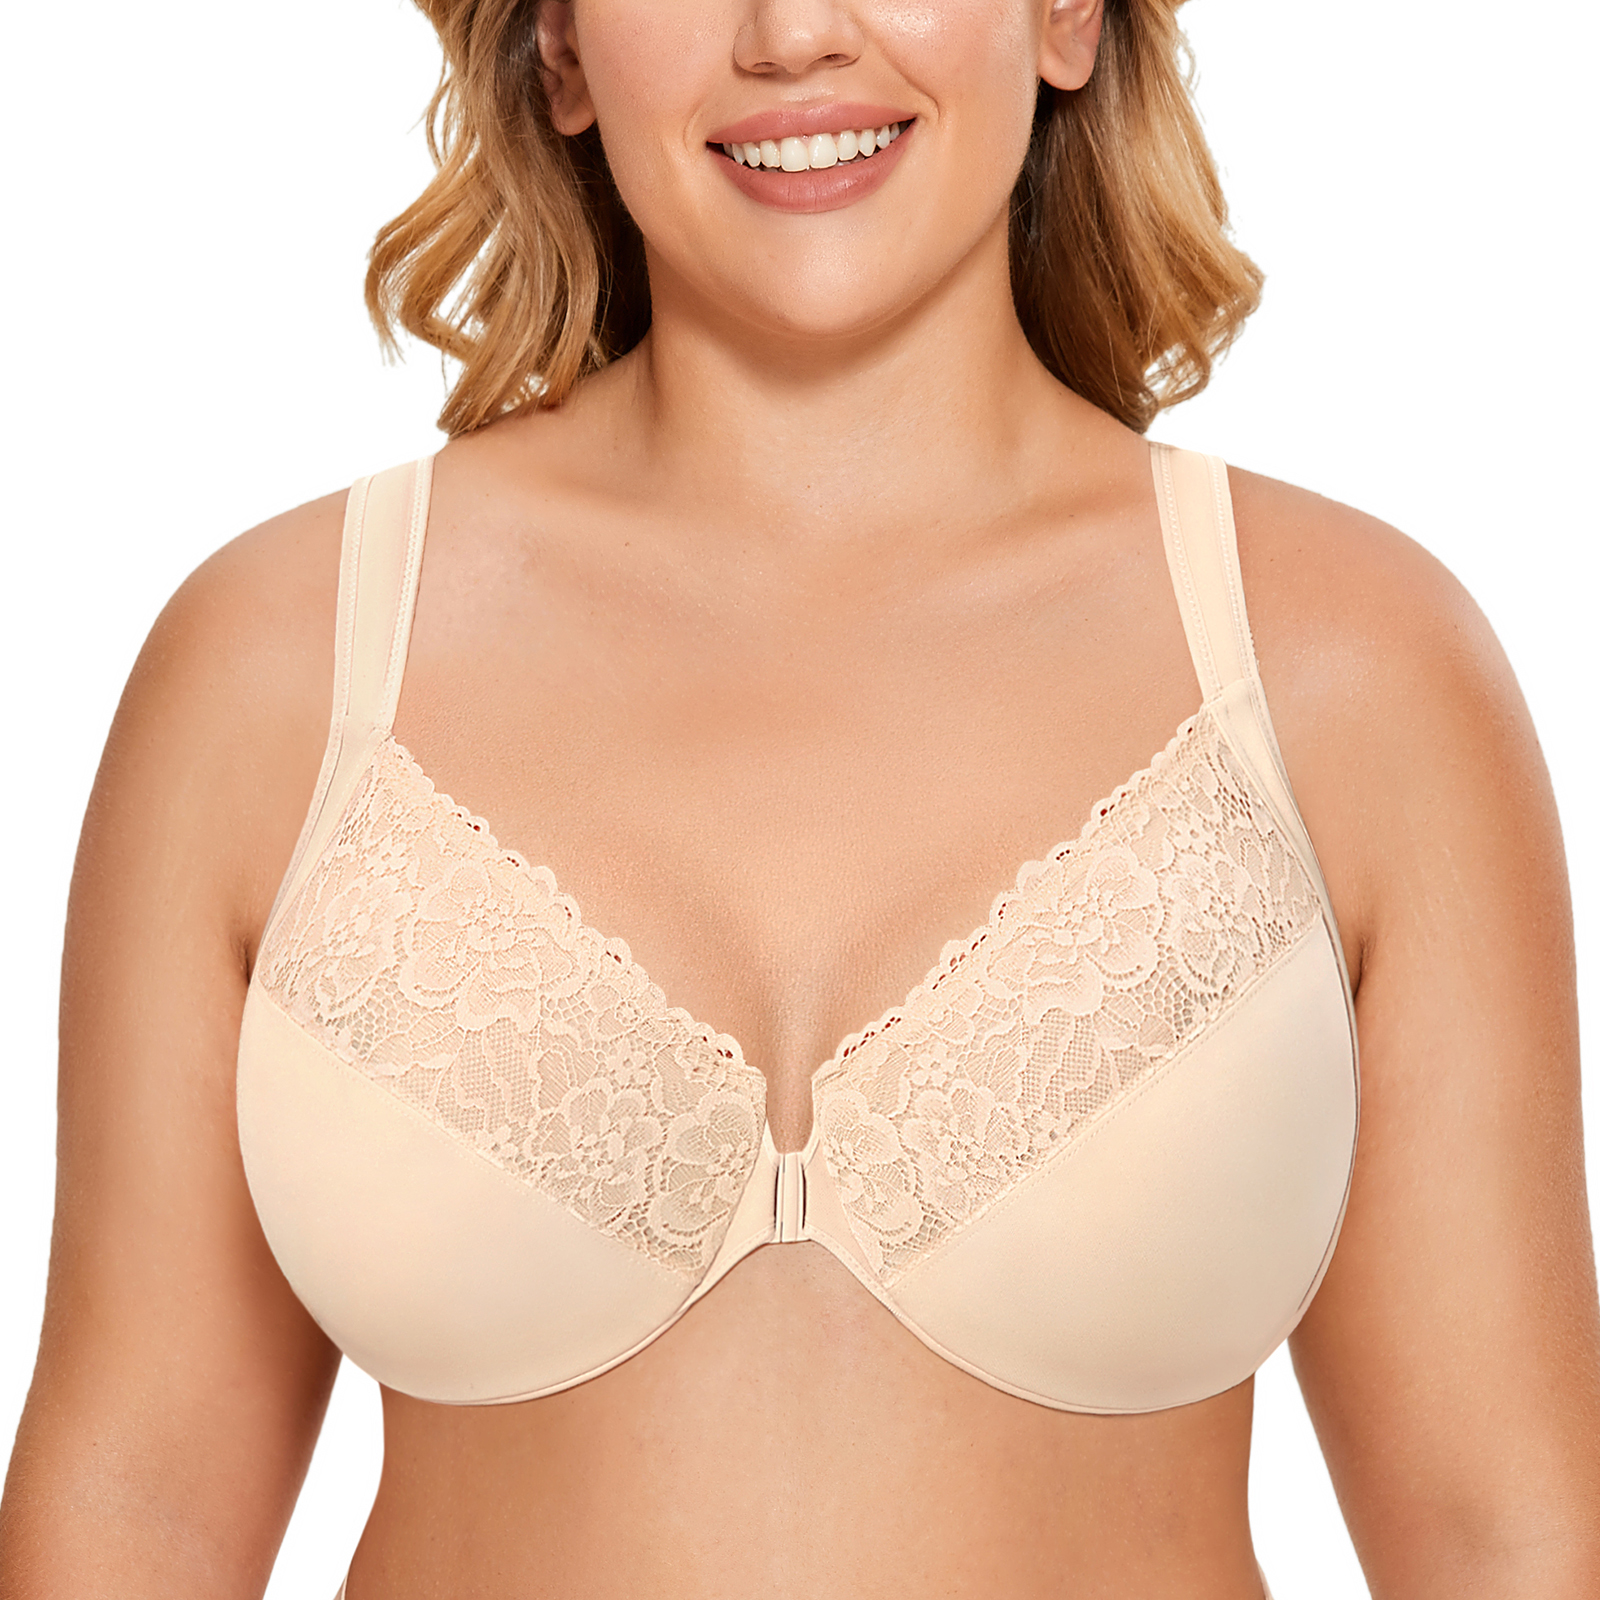  Womens Full Coverage Plus Size Floral Underwire Non Padded  Lace Bra Lingerie 48B Beige